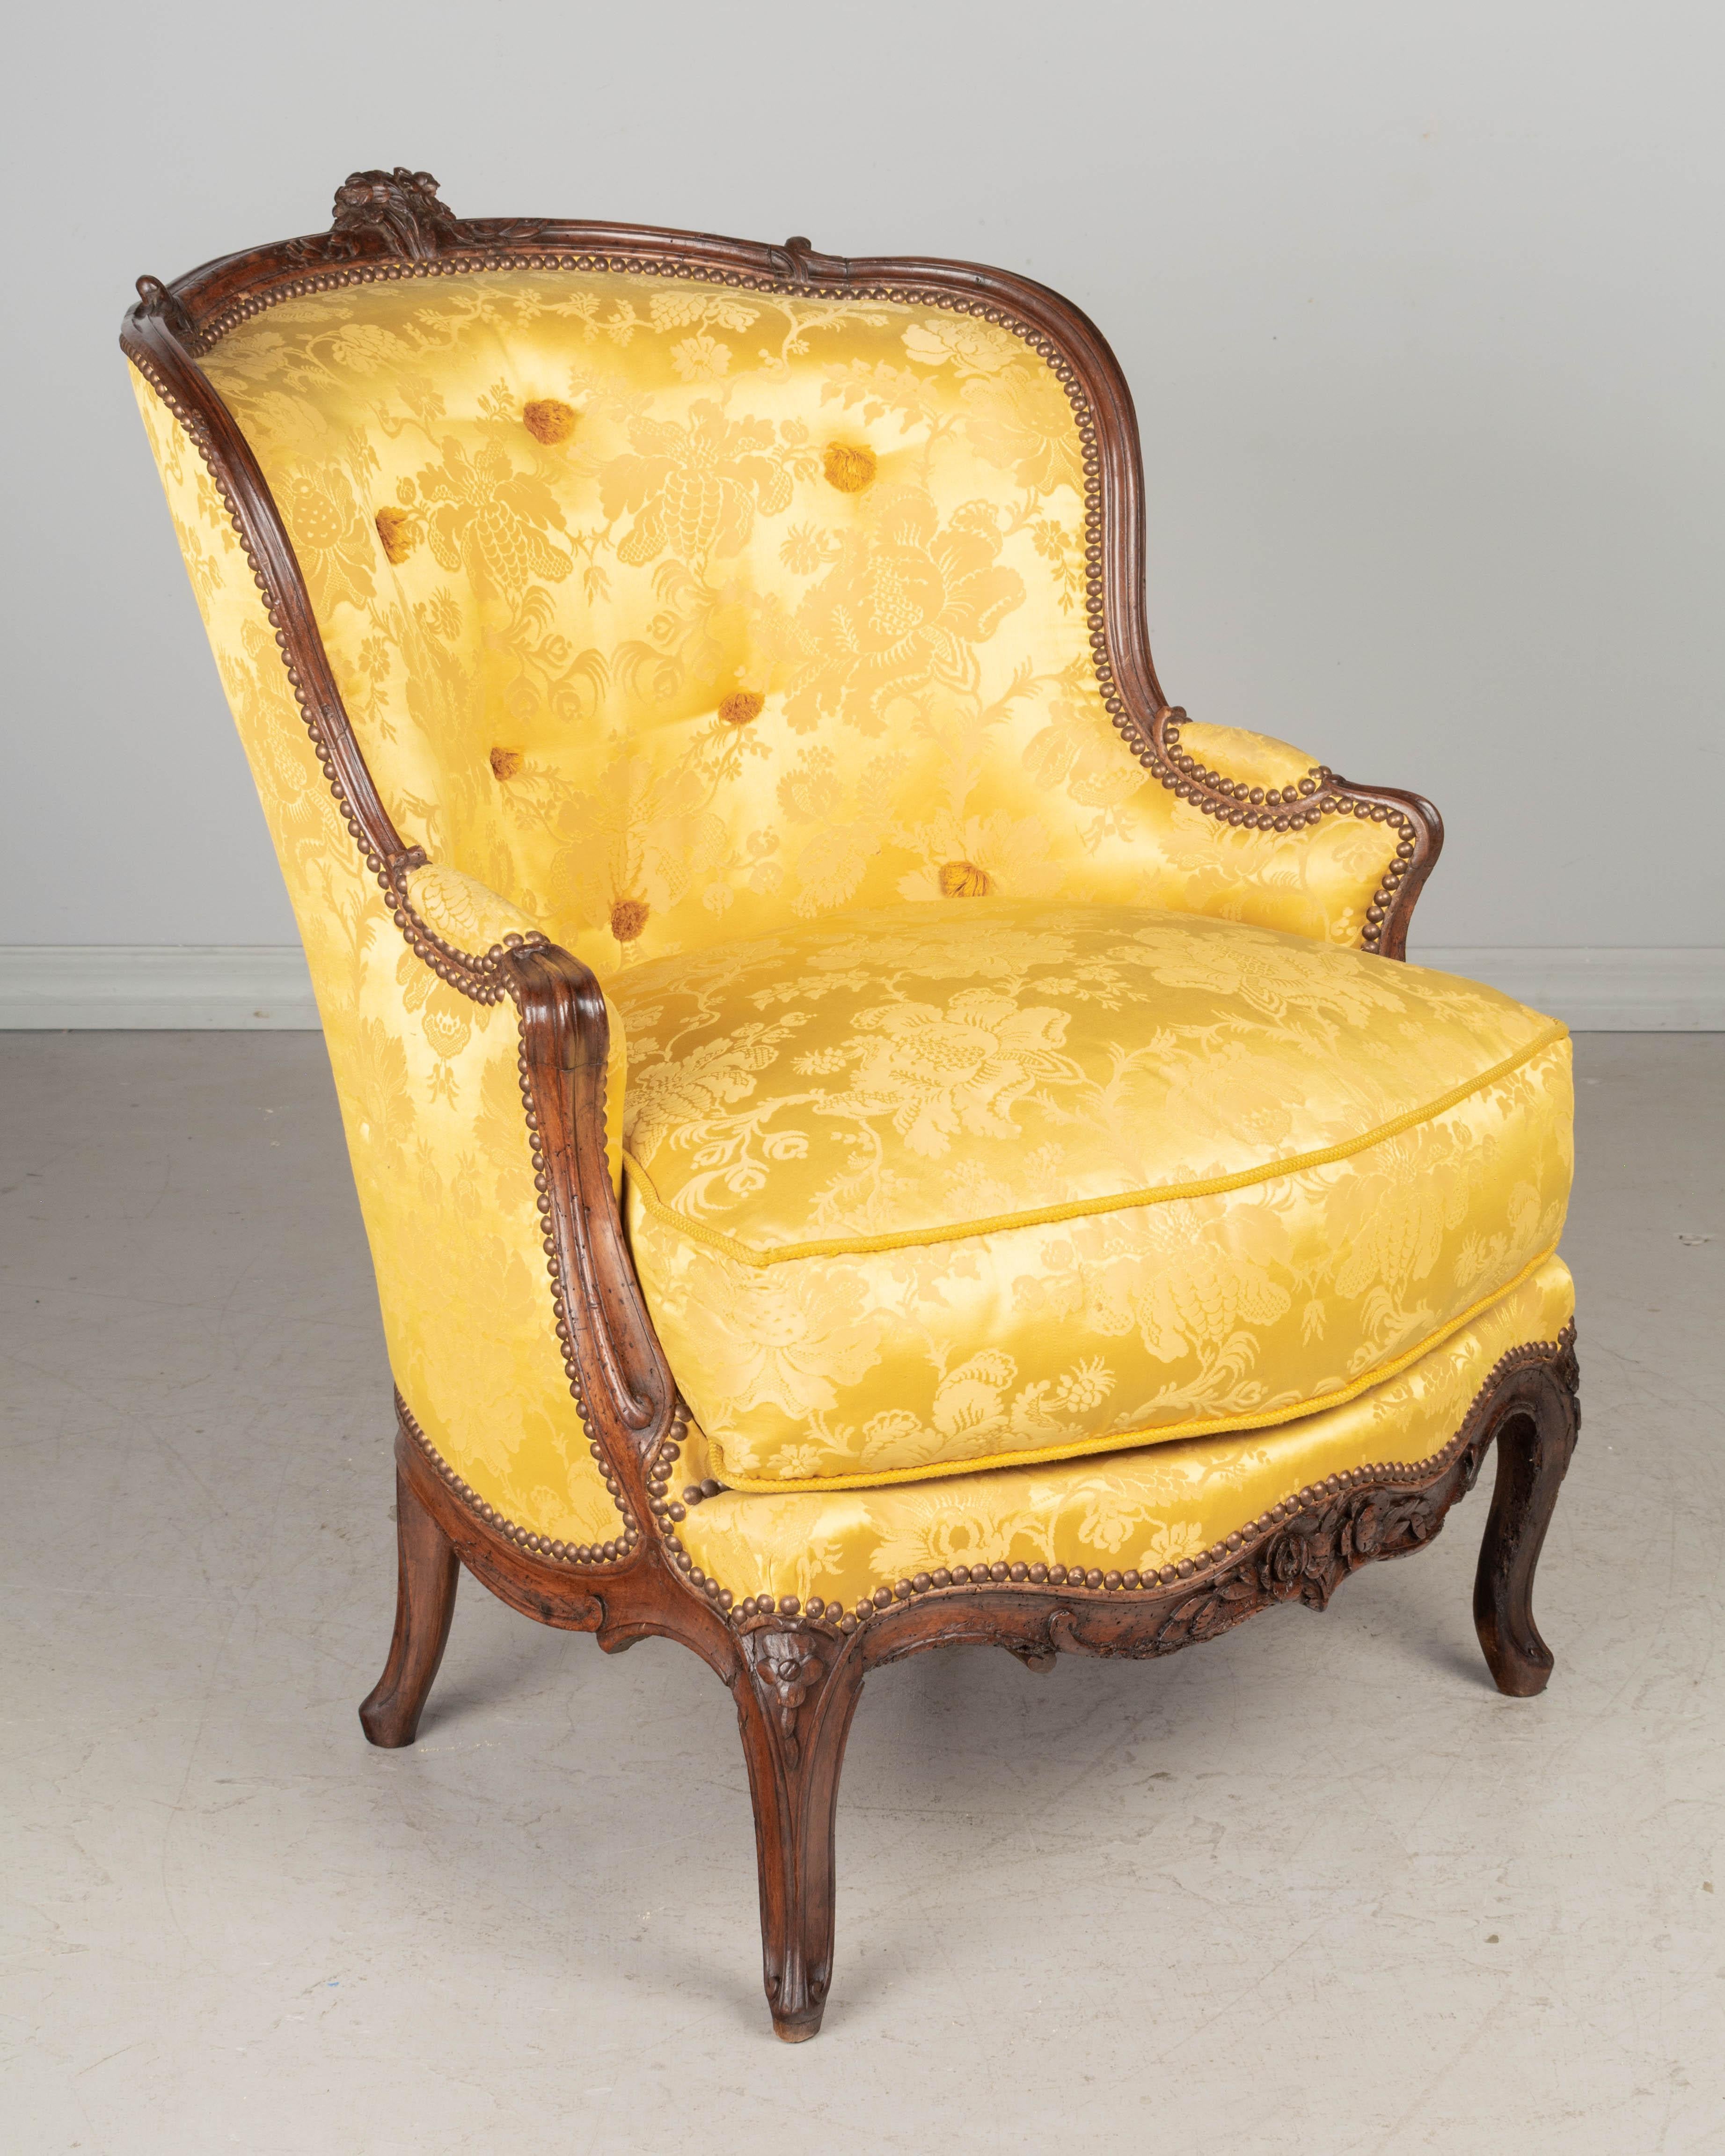 An 18th century French Louis XV bergère or armchair. Sturdy walnut frame with nice hand-carved floral details and crafted using pegged construction. Expertly reupholstered, as found, in bright yellow silk damask fabric with tufting and nailhead